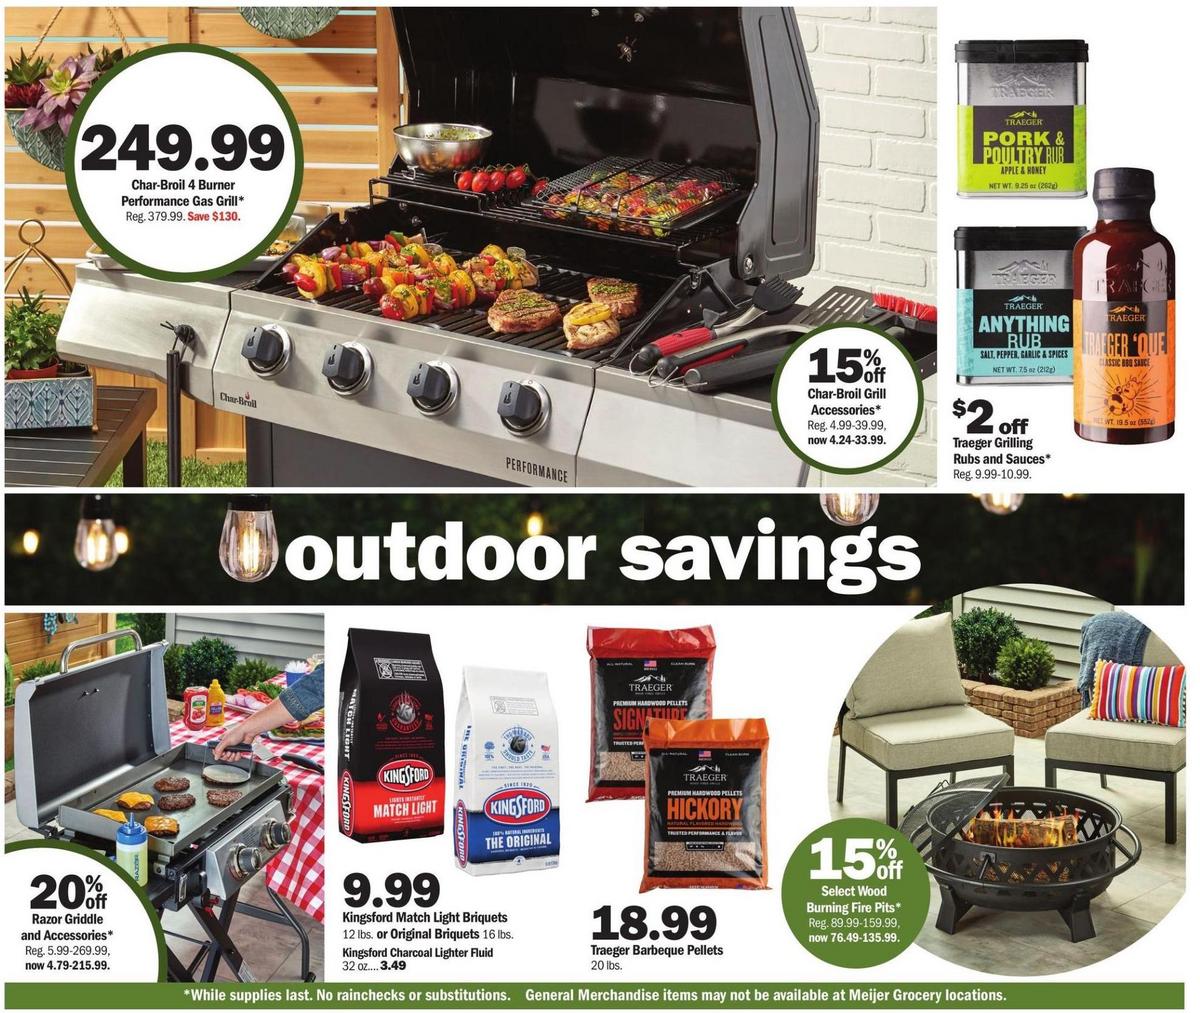 Meijer Garden Weekly Ad from April 2